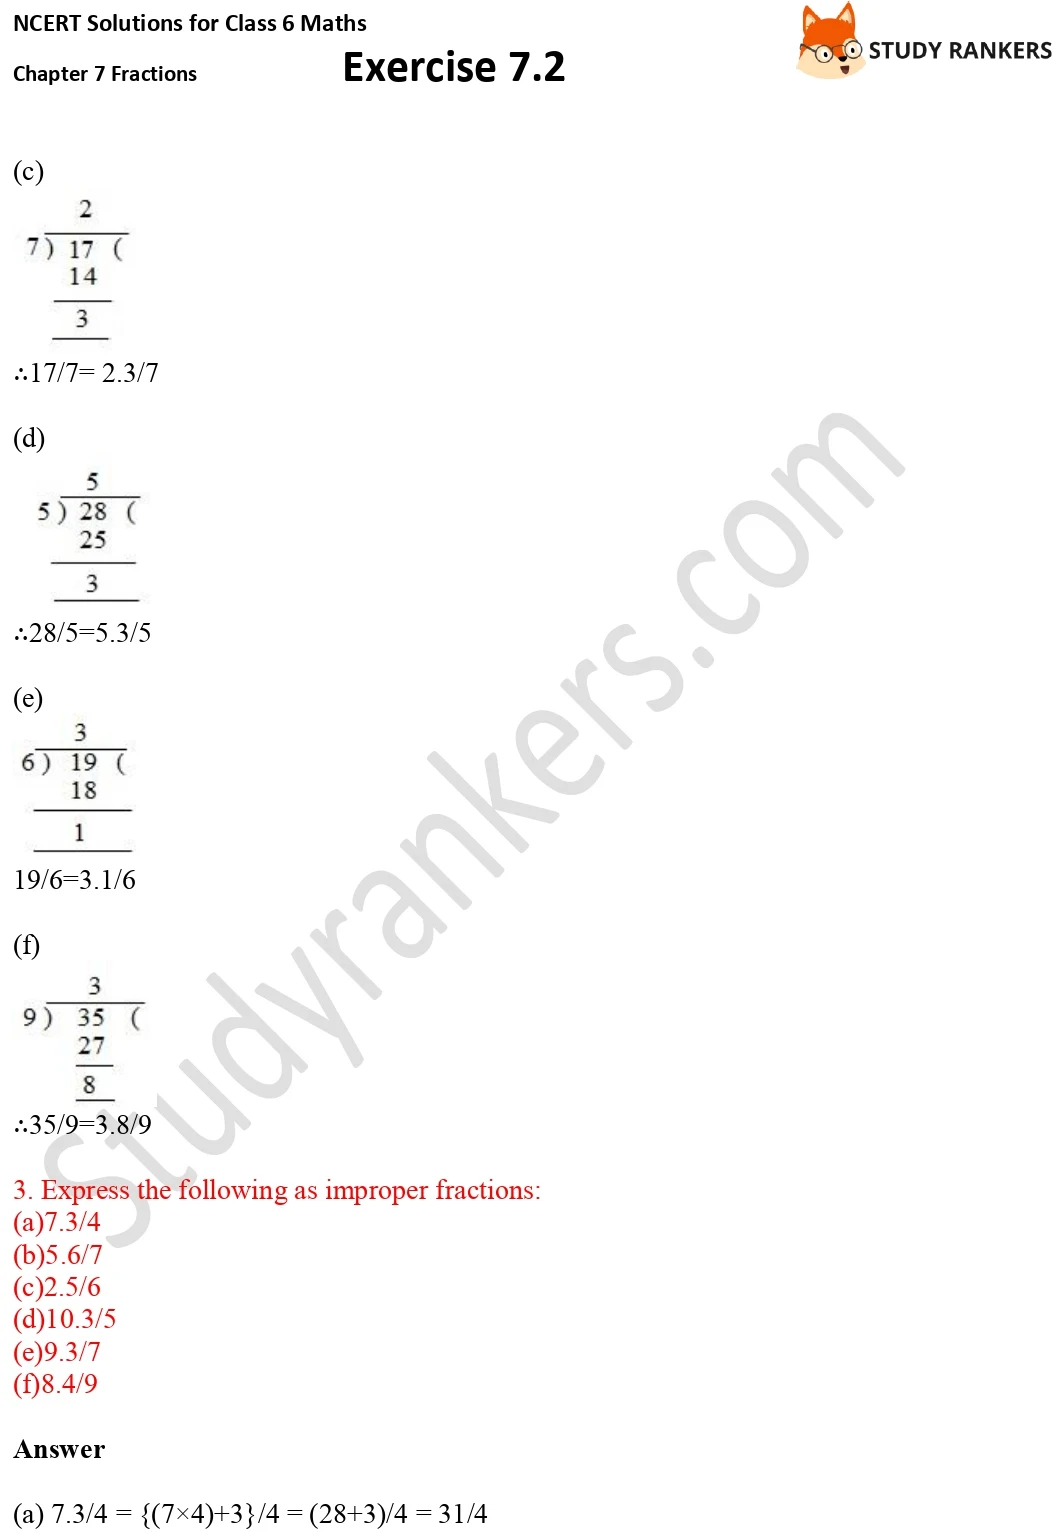 NCERT Solutions for Class 6 Maths Chapter 7 Fractions Exercise 7.2 Part 2